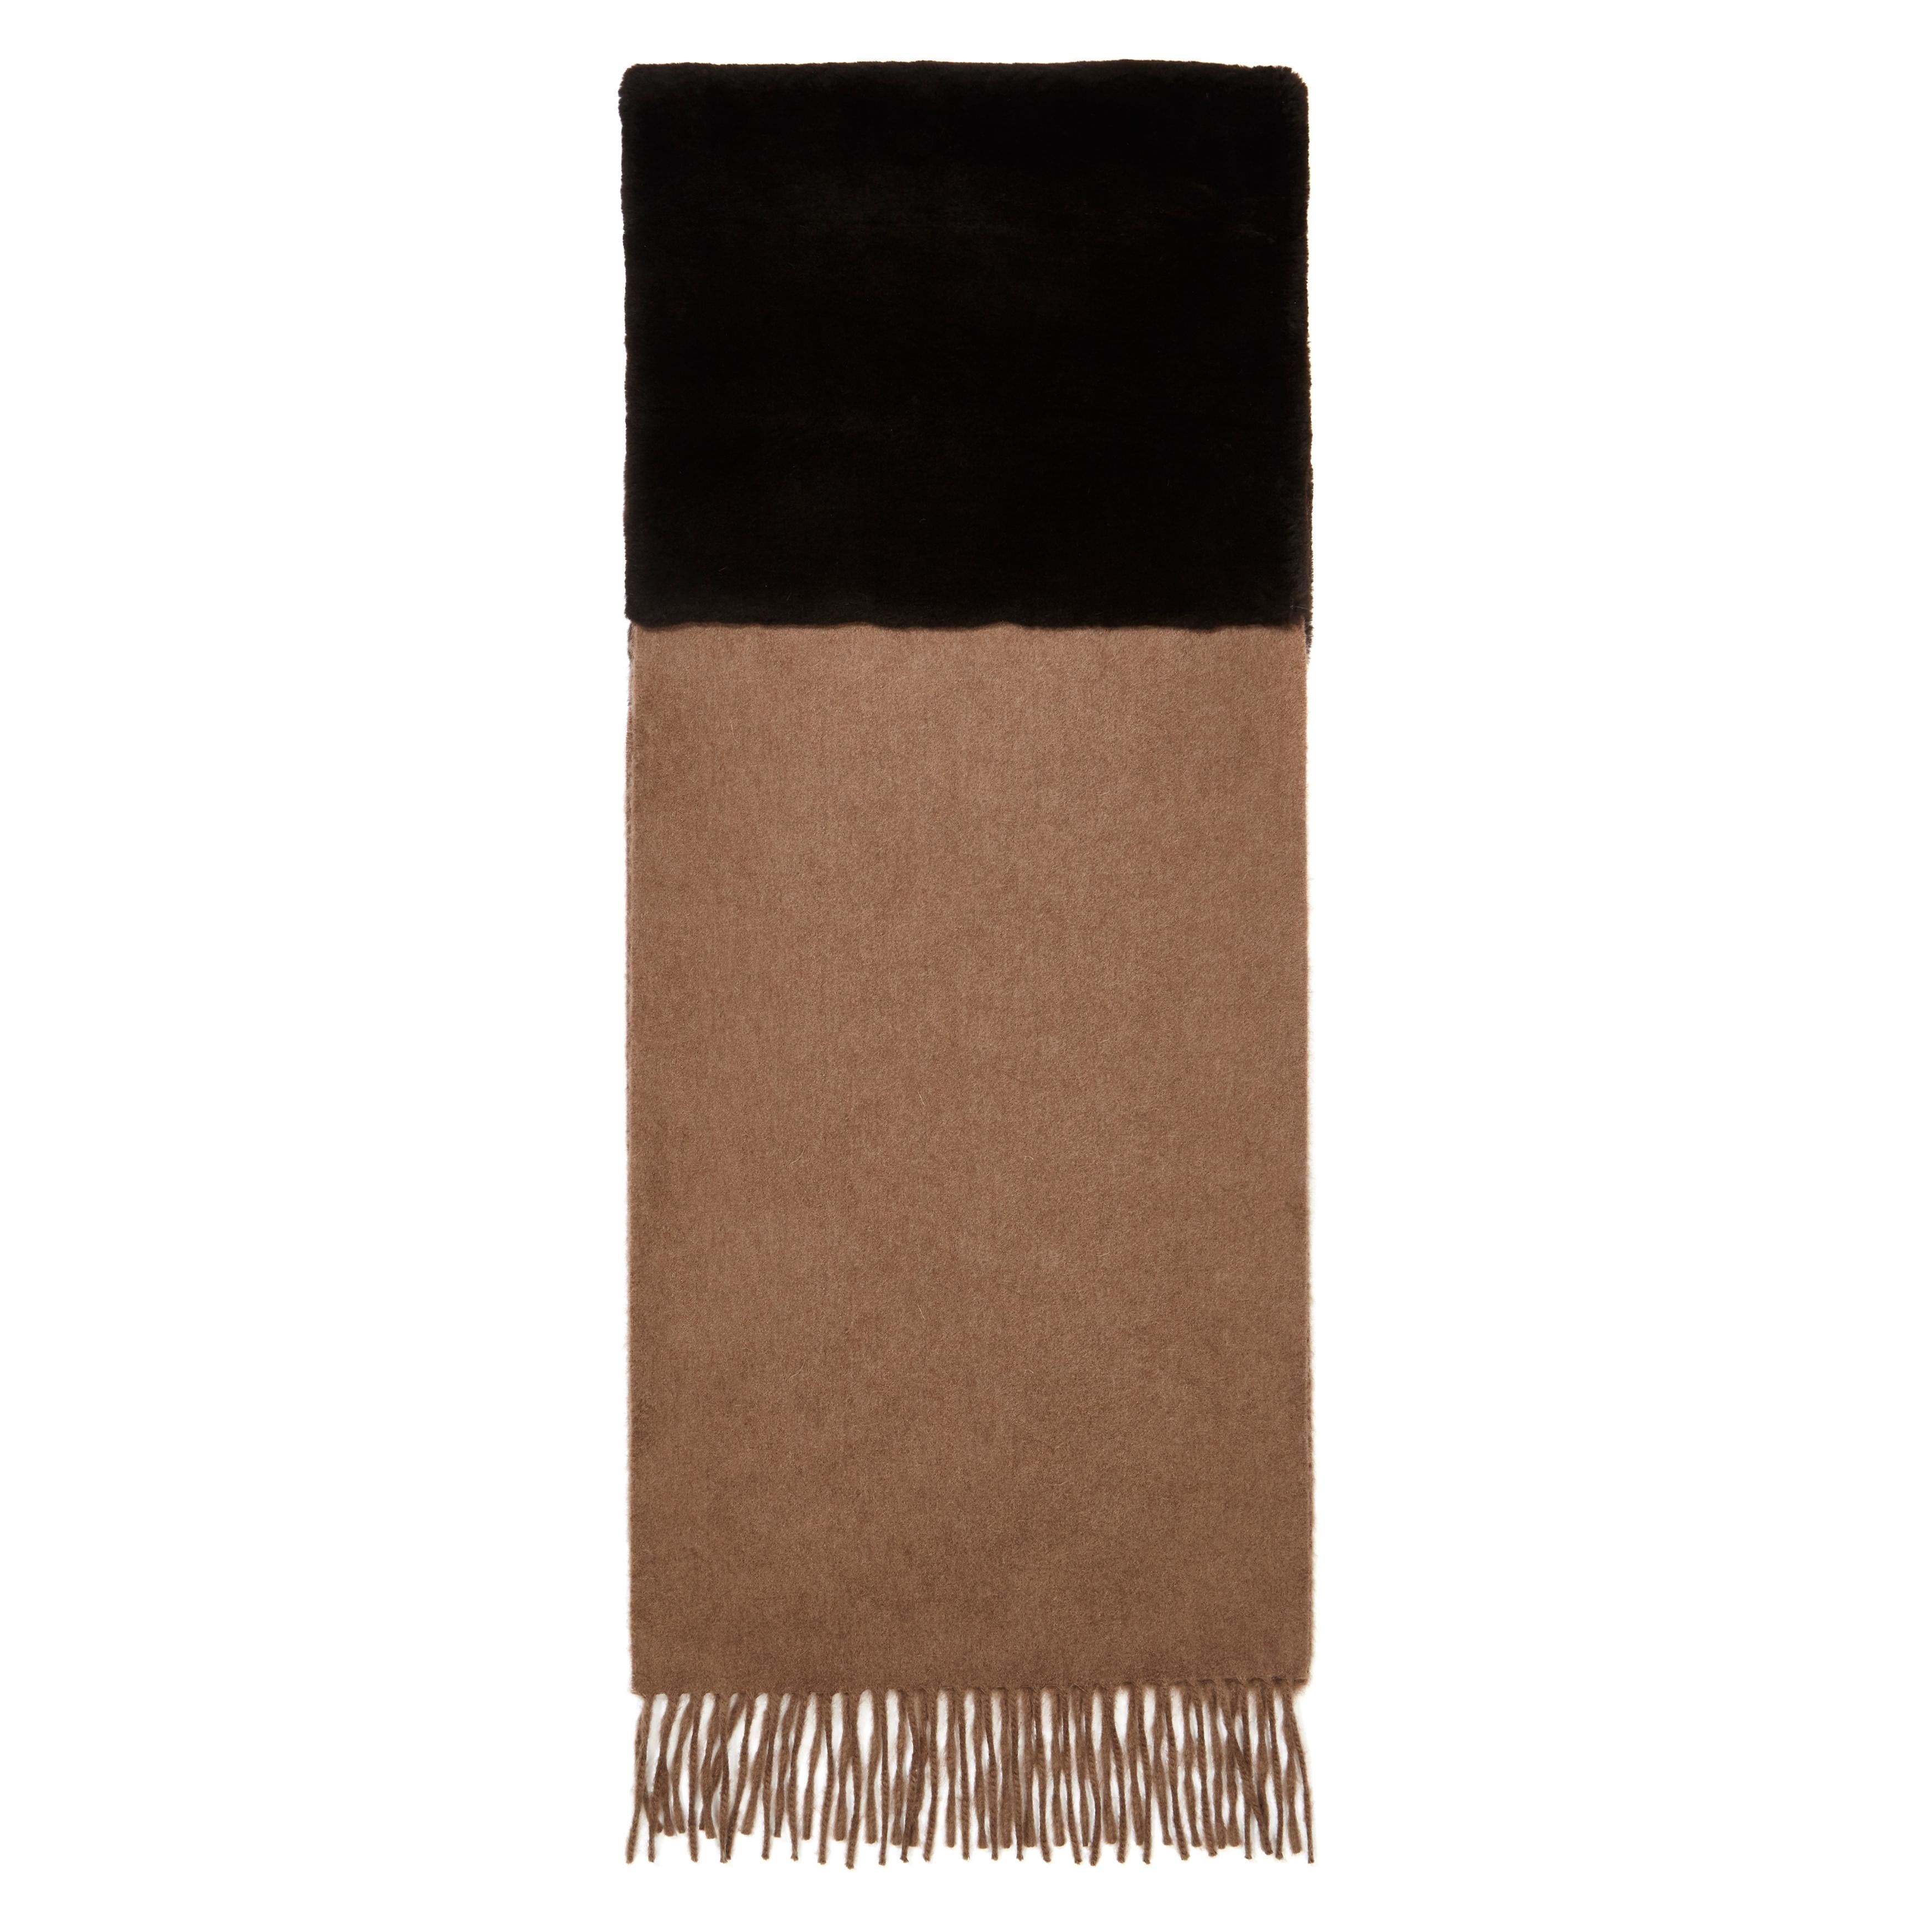 This reversible scarf is made from the finest Scottish Cashmere and lined with the most exquisite nutria fur to keep you warm.  Wear with the fur inside to stay warm or on the outside for style.   Its warmth envelopes you with luxury, perfect for